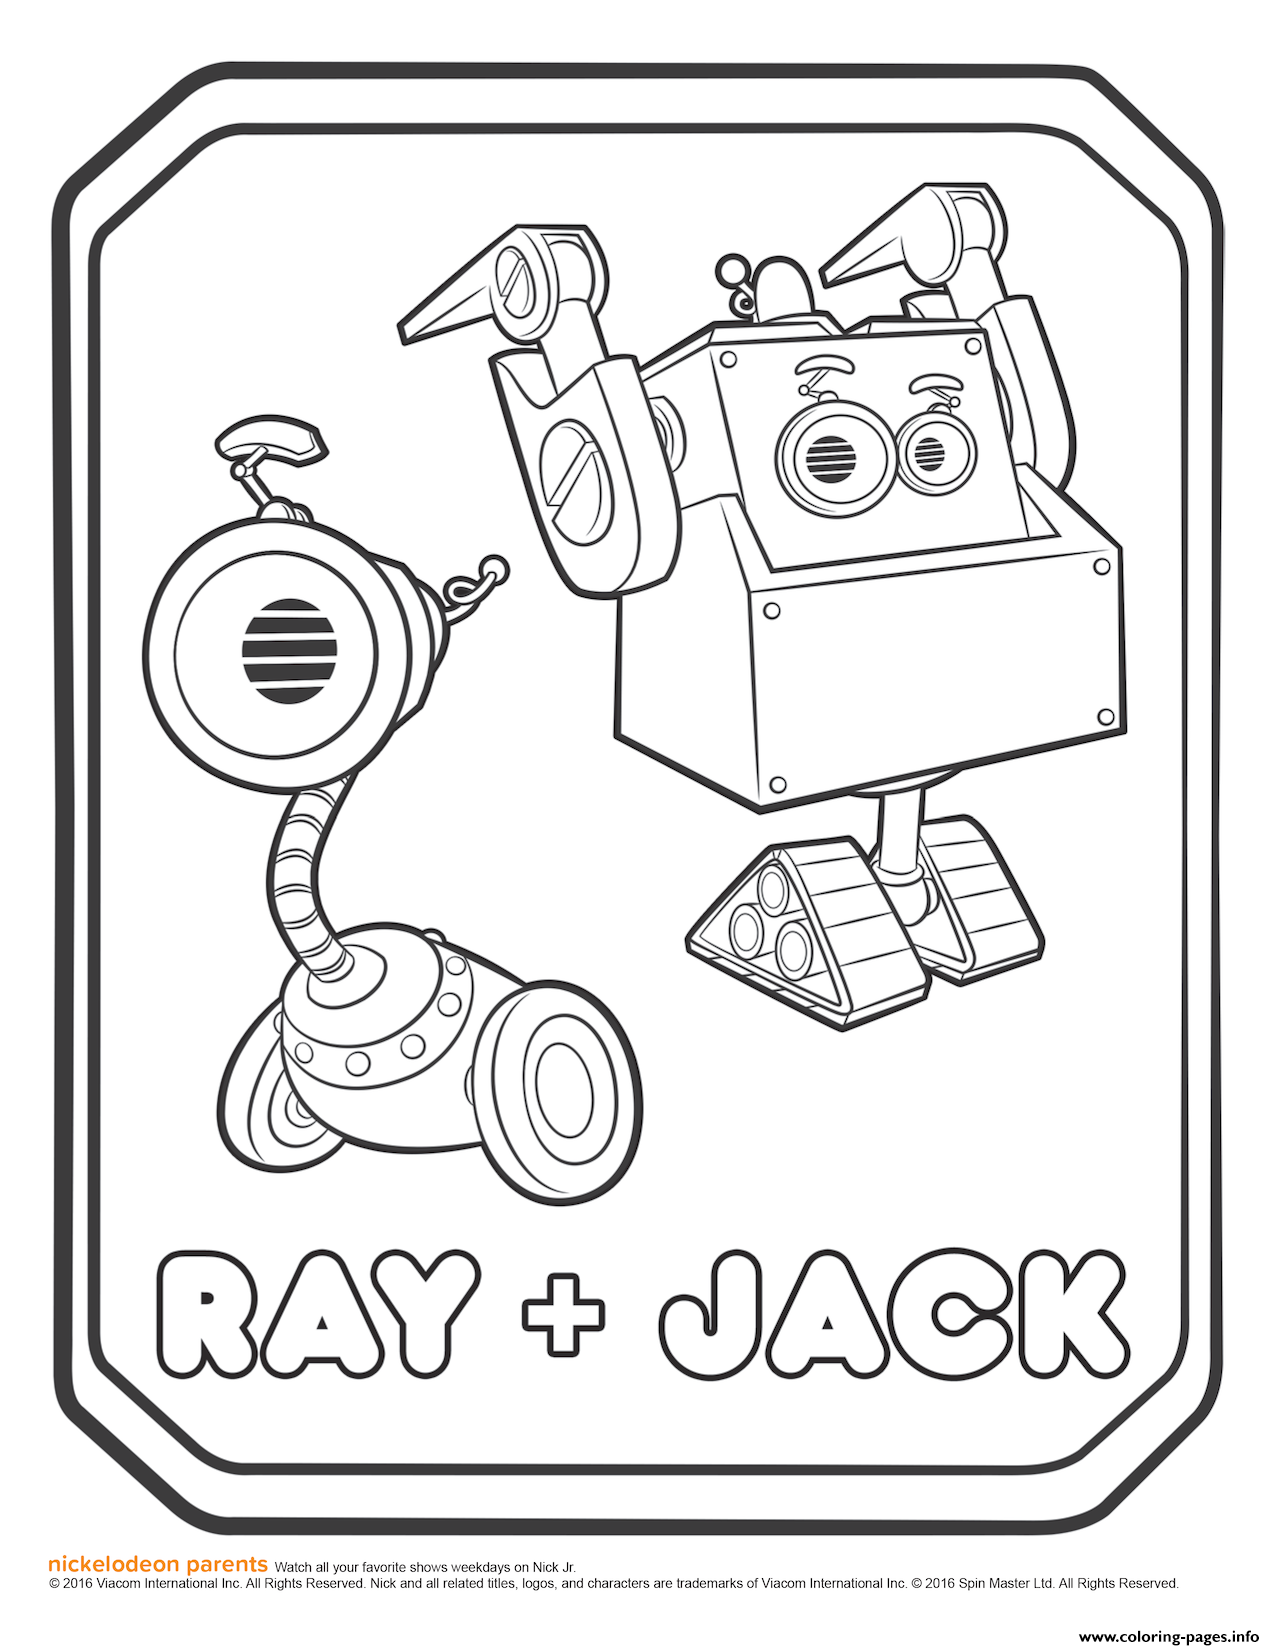 Rusty Rivets Ray And Jack Coloring Page Coloring Pages Printable